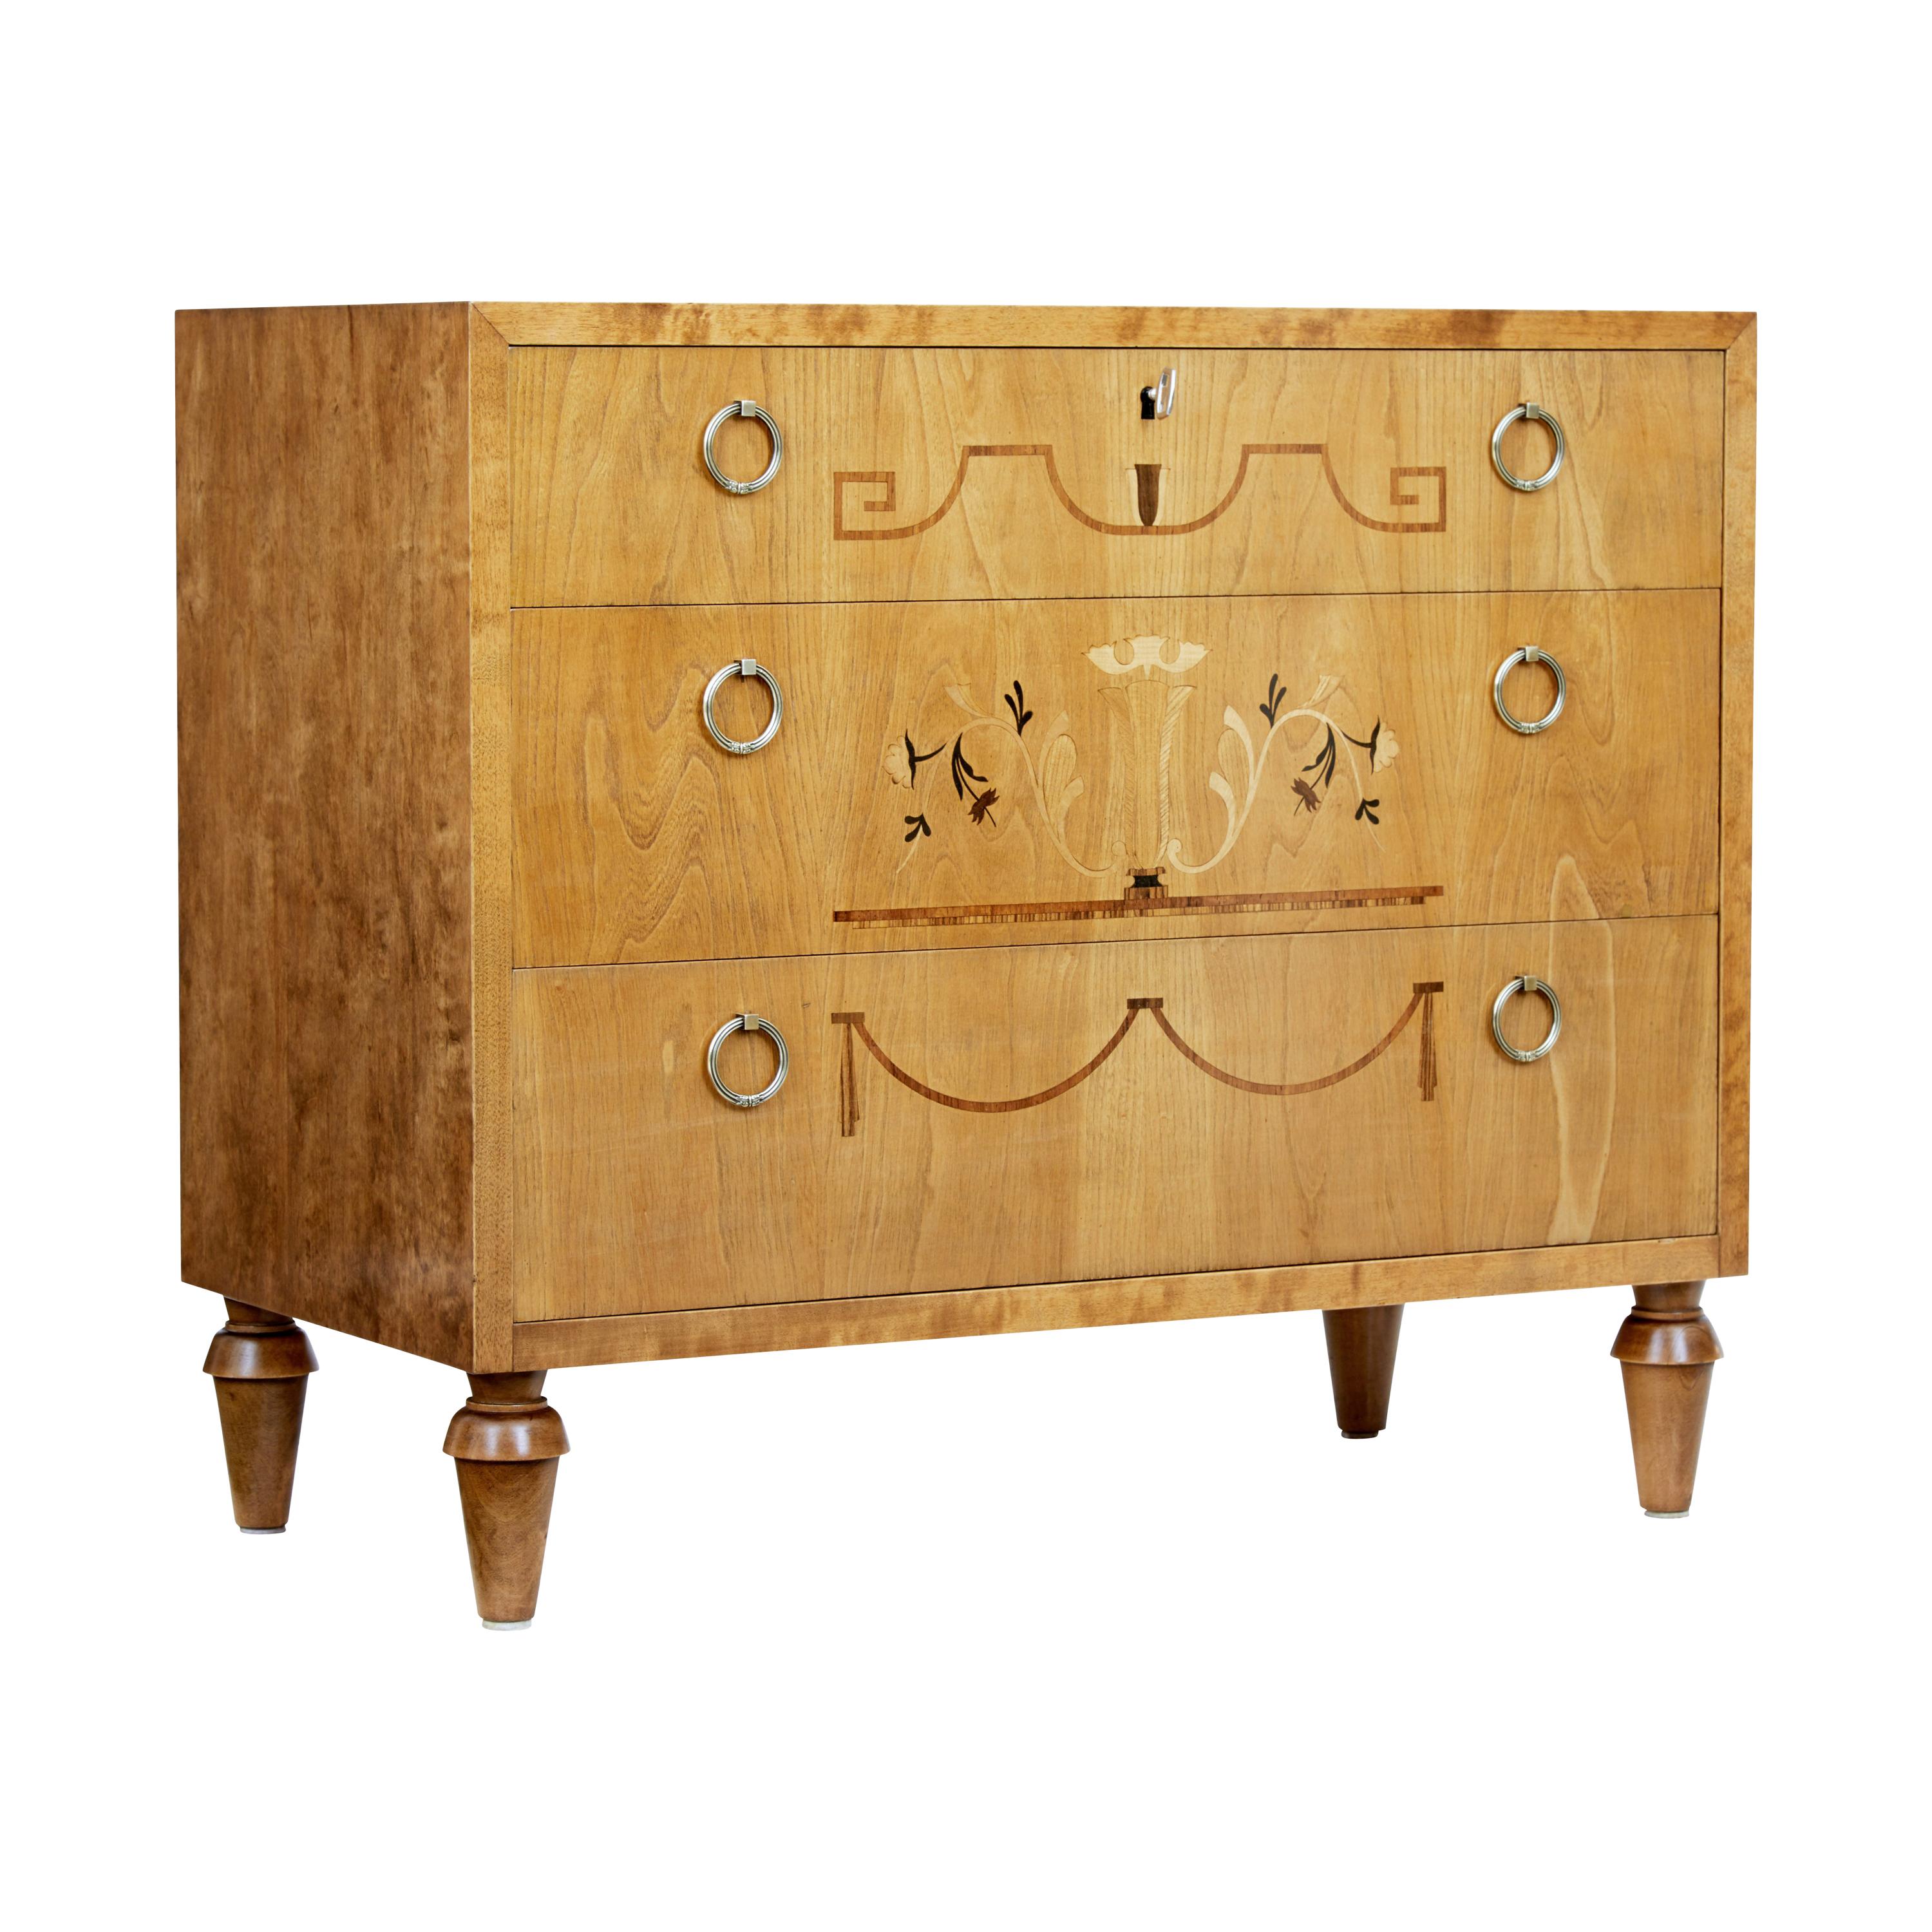 Late Art Deco Inlaid Elm and Birch Chest of Drawers